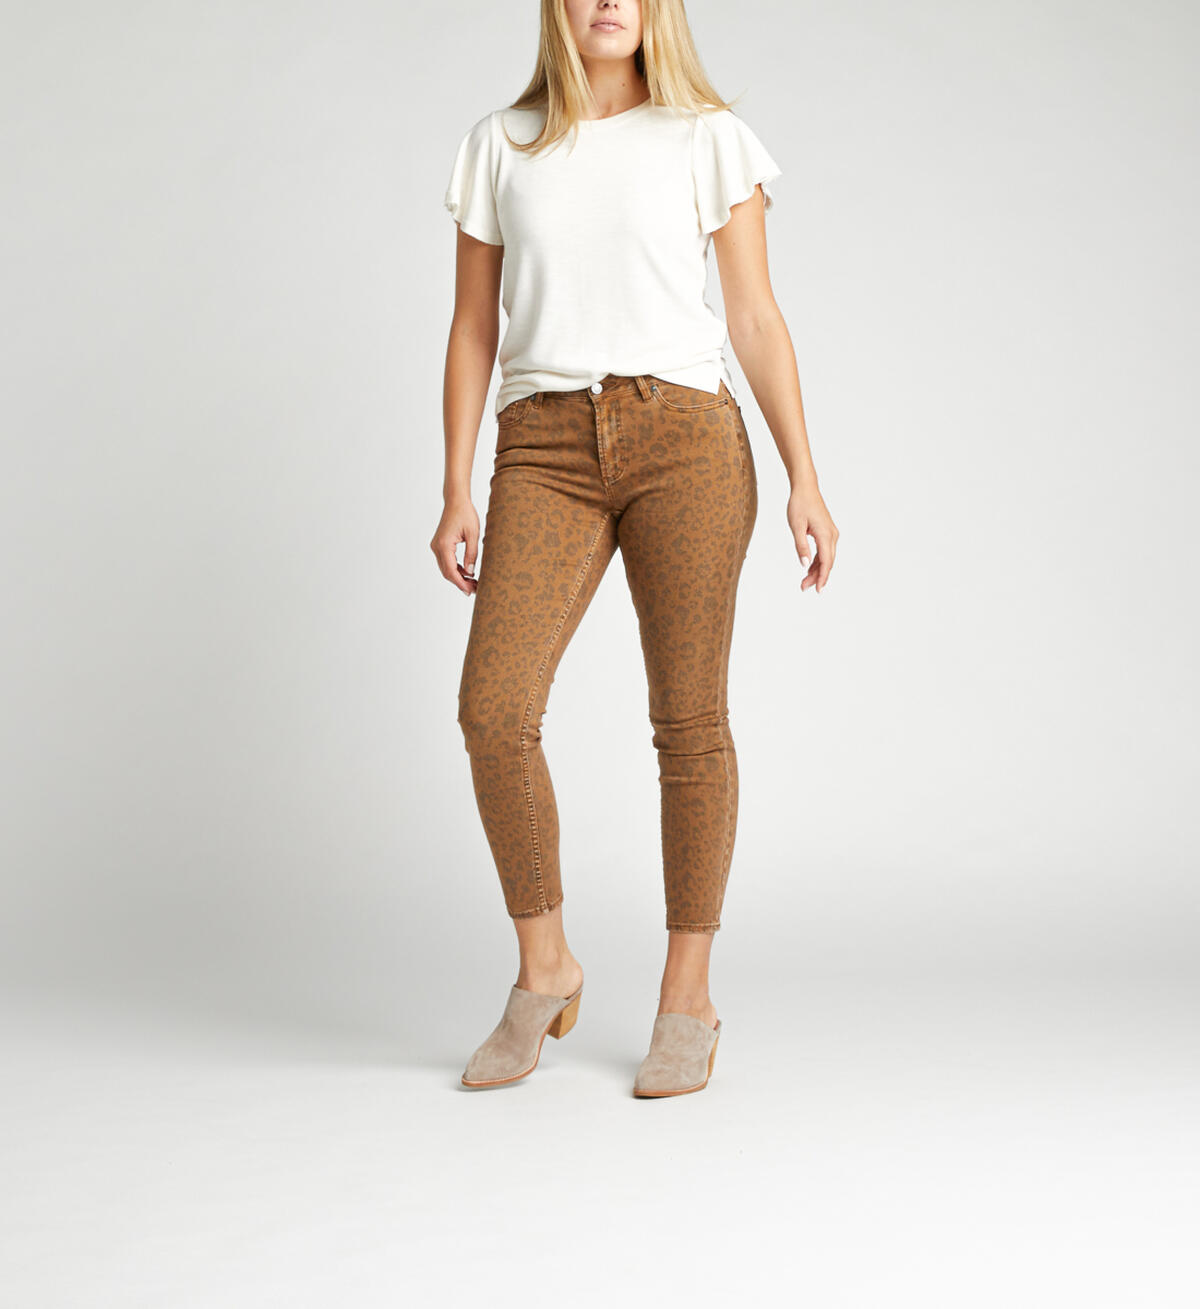 Most Wanted Mid Rise Skinny Jeans, Tan, hi-res image number 3